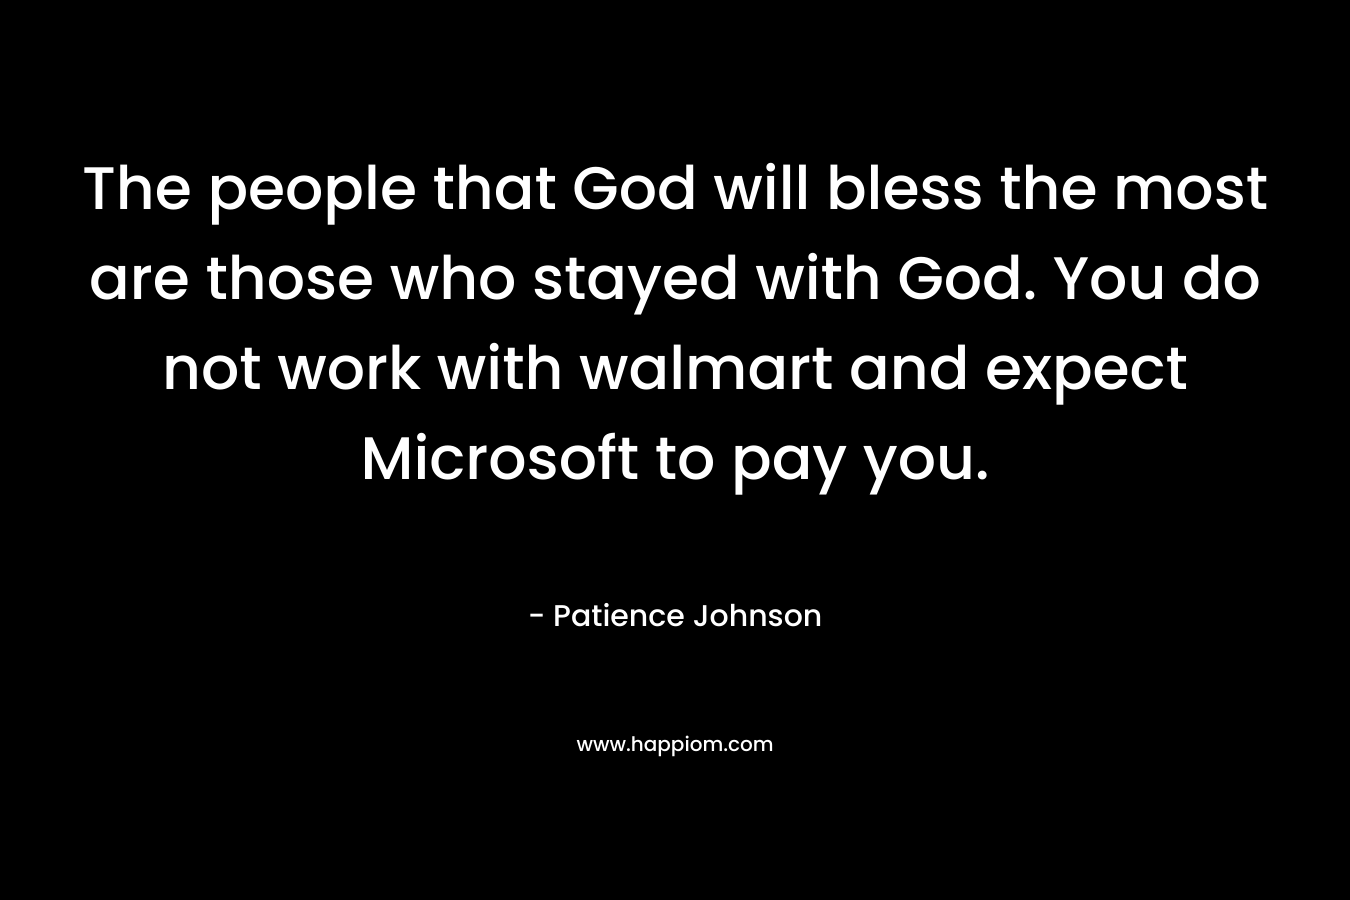 The people that God will bless the most are those who stayed with God. You do not work with walmart and expect Microsoft to pay you.